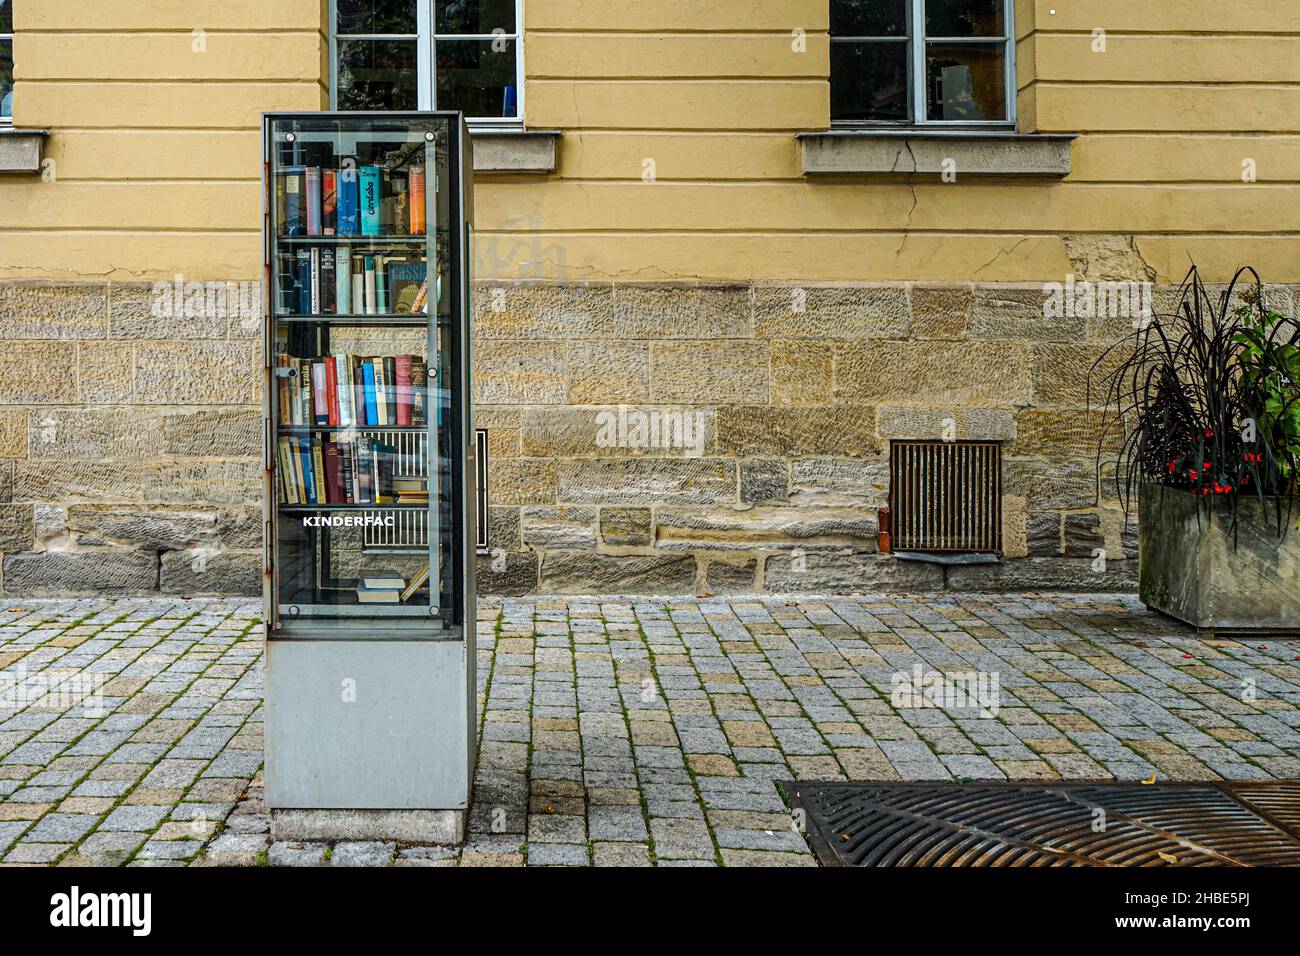 A small public library cupboard on a pavement. Stock Photo